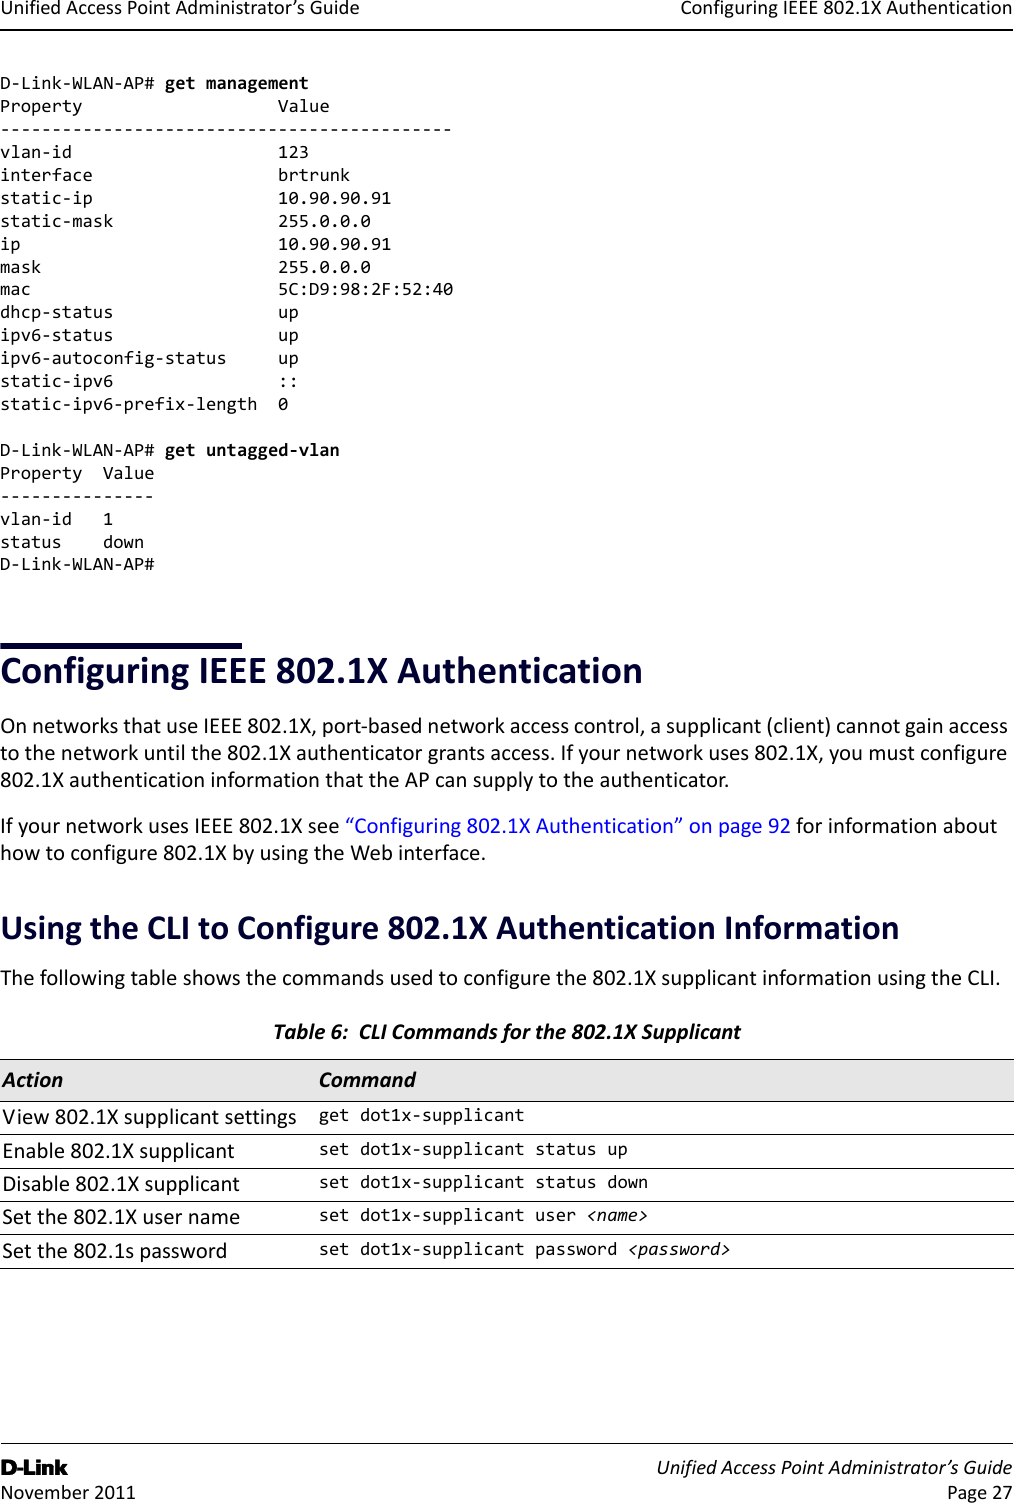 ConfiguringIEEE802.1XAuthenticationD-Link UnifiedAccessPointAdministrator’sGuide November2011 Page27UnifiedAccessPointAdministrator’sGuideD‐Link‐WLAN‐AP#getmanagementPropertyValue‐‐‐‐‐‐‐‐‐‐‐‐‐‐‐‐‐‐‐‐‐‐‐‐‐‐‐‐‐‐‐‐‐‐‐‐‐‐‐‐‐‐‐‐vlan‐id123interfacebrtrunkstatic‐ip10.90.90.91static‐mask255.0.0.0ip10.90.90.91mask255.0.0.0mac5C:D9:98:2F:52:40dhcp‐statusupipv6‐statusupipv6‐autoconfig‐statusupstatic‐ipv6::static‐ipv6‐prefix‐length0D‐Link‐WLAN‐AP#getuntagged‐vlanPropertyValue‐‐‐‐‐‐‐‐‐‐‐‐‐‐‐vlan‐id1statusdownD‐Link‐WLAN‐AP#ConfiguringIEEE802.1XAuthenticationOnnetworksthatuseIEEE802.1X,port‐basednetworkaccesscontrol,asupplicant(client)cannotgainaccesstothenetworkuntilthe802.1Xauthenticatorgrantsaccess.Ifyournetworkuses802.1X,youmustconfigure802.1XauthenticationinformationthattheAPcansupplytotheauthenticator.IfyournetworkusesIEEE802.1Xsee“Configuring802.1XAuthentication”onpage92forinformationabouthowtoconfigure802.1XbyusingtheWebinterface.UsingtheCLItoConfigure802.1XAuthenticationInformationThefollowingtableshowsthecommandsusedtoconfigurethe802.1XsupplicantinformationusingtheCLI.Table6:CLICommandsforthe802.1XSupplicantAction CommandView802.1Xsupplicantsettings getdot1x‐supplicantEnable802.1Xsupplicant setdot1x‐supplicantstatusupDisable802.1Xsupplicant setdot1x‐supplicantstatusdownSetthe802.1Xusername setdot1x‐supplicantuser&lt;name&gt;Setthe802.1spassword setdot1x‐supplicantpassword&lt;password&gt;